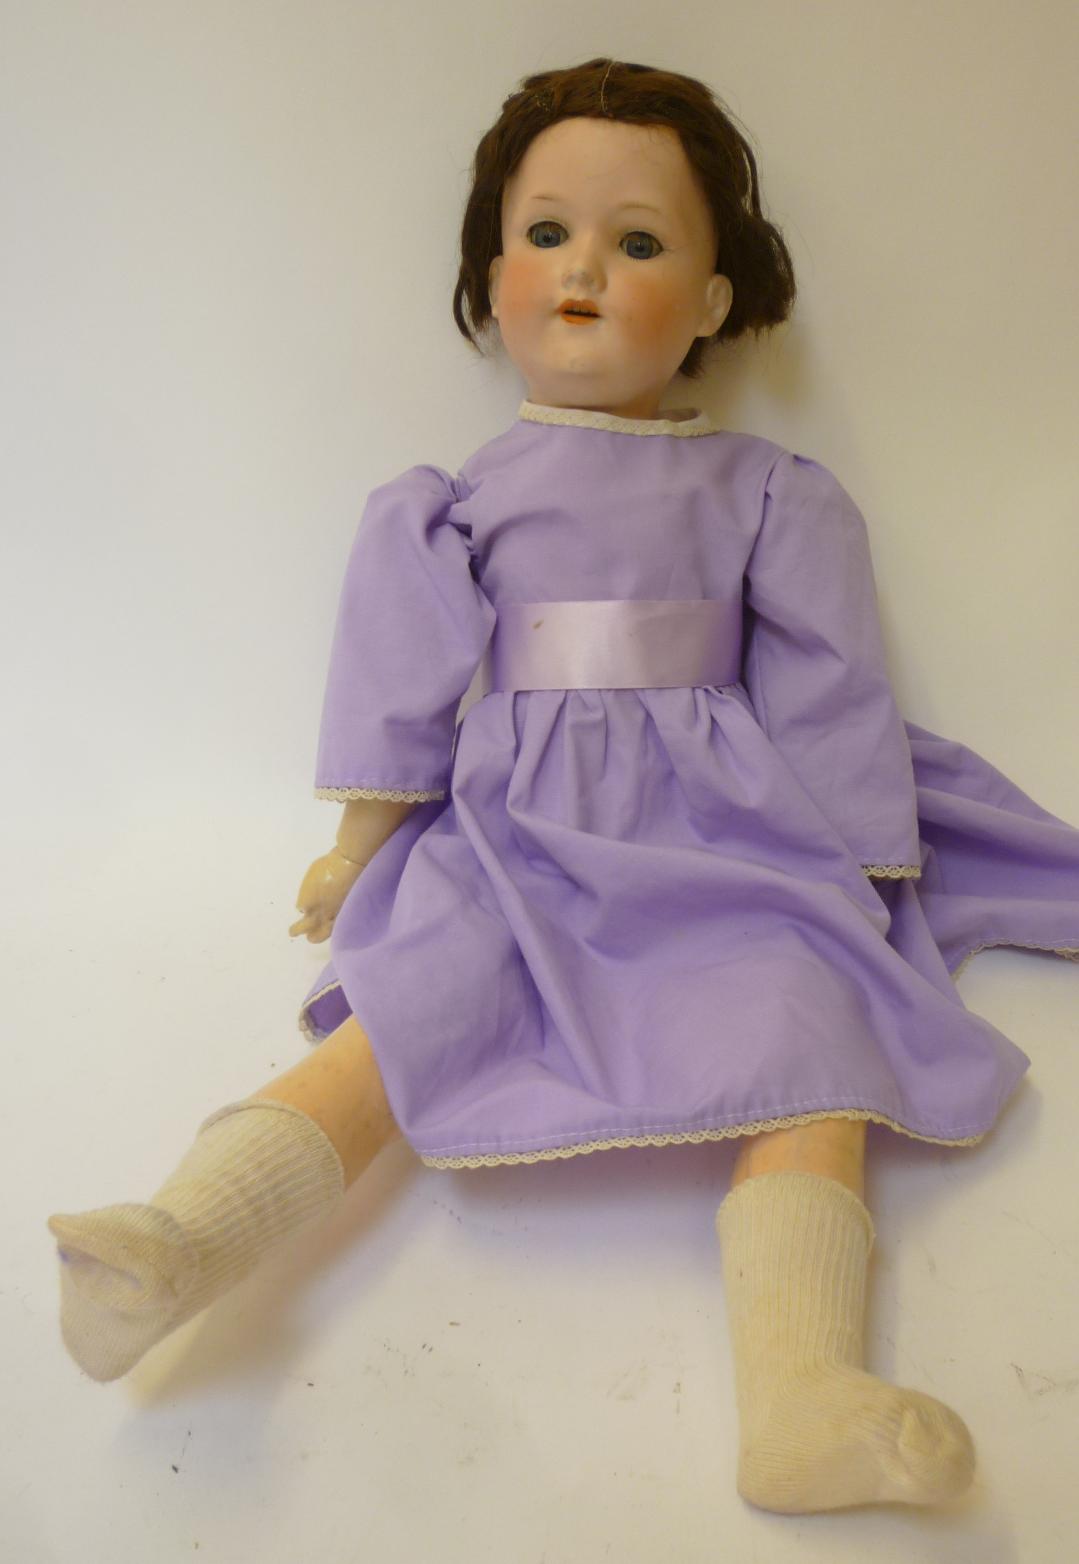 An Armand Marseille bisque head girl doll with blue glass sleeping eyes, open mouth and teeth, brown